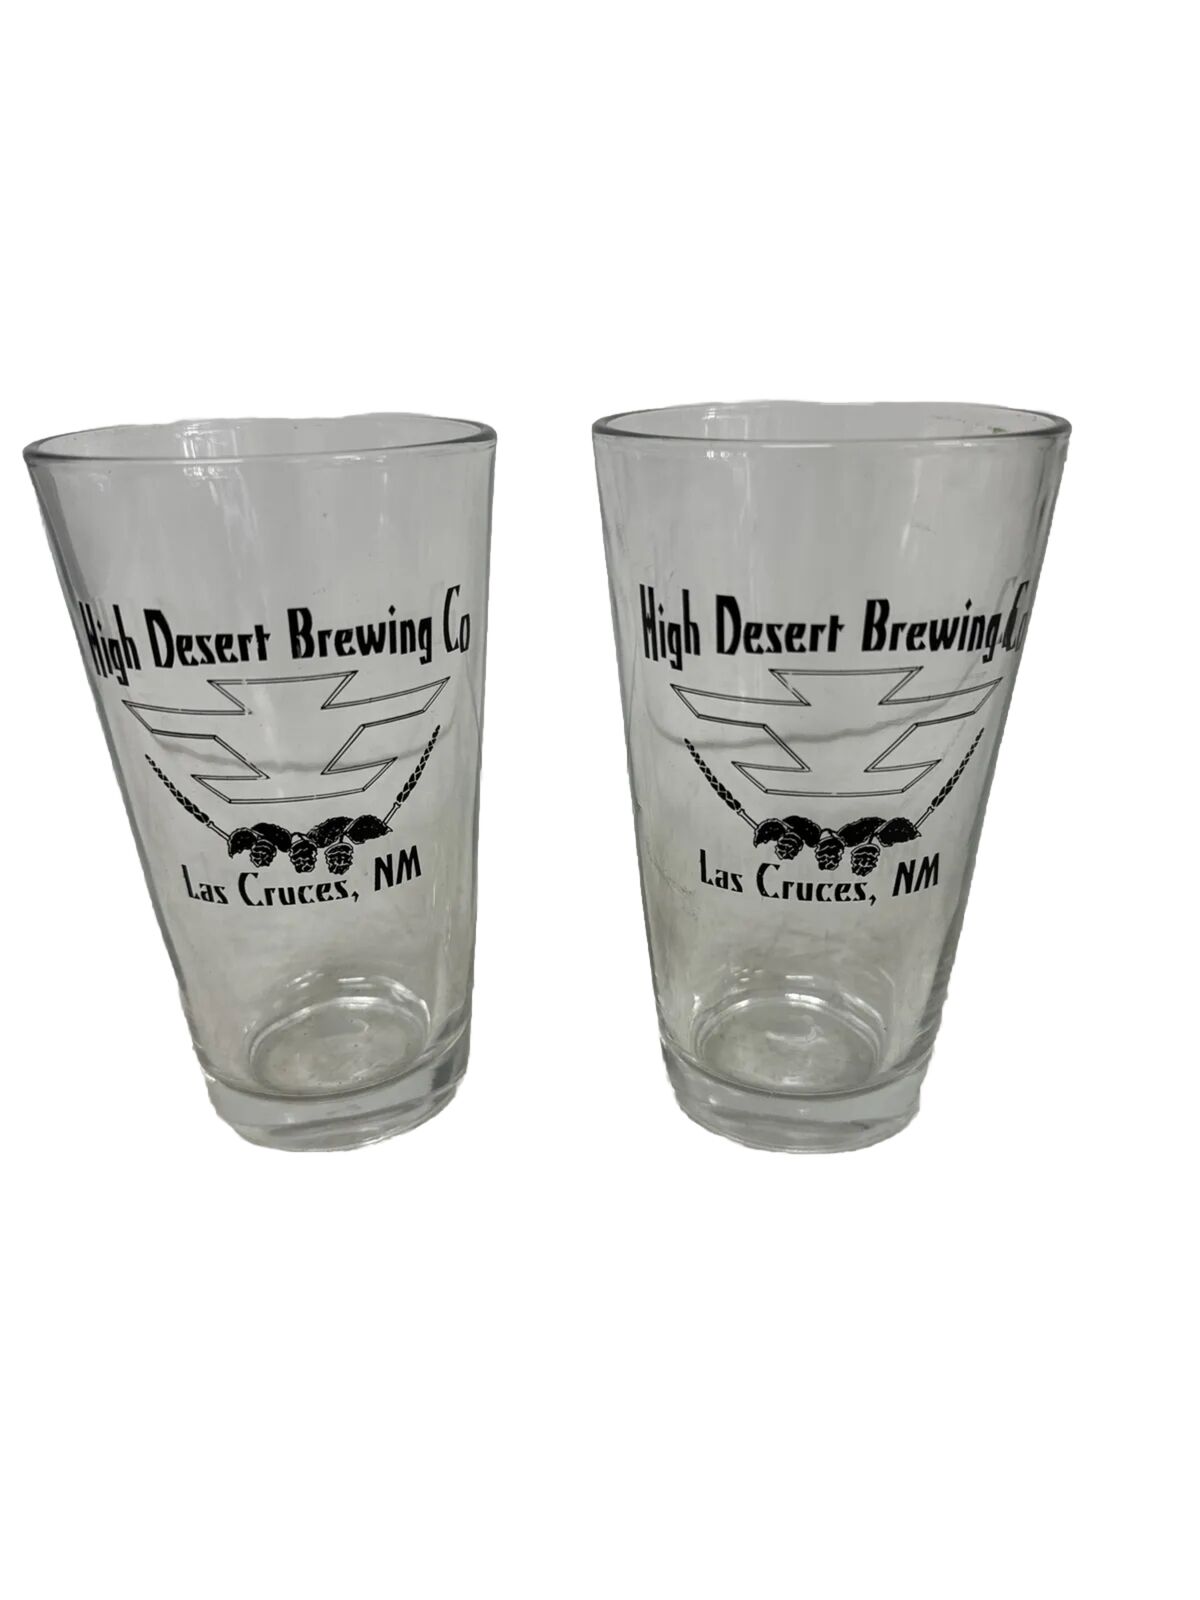 High Desert Brewing Co Las Cruces, NM Beer Glasses